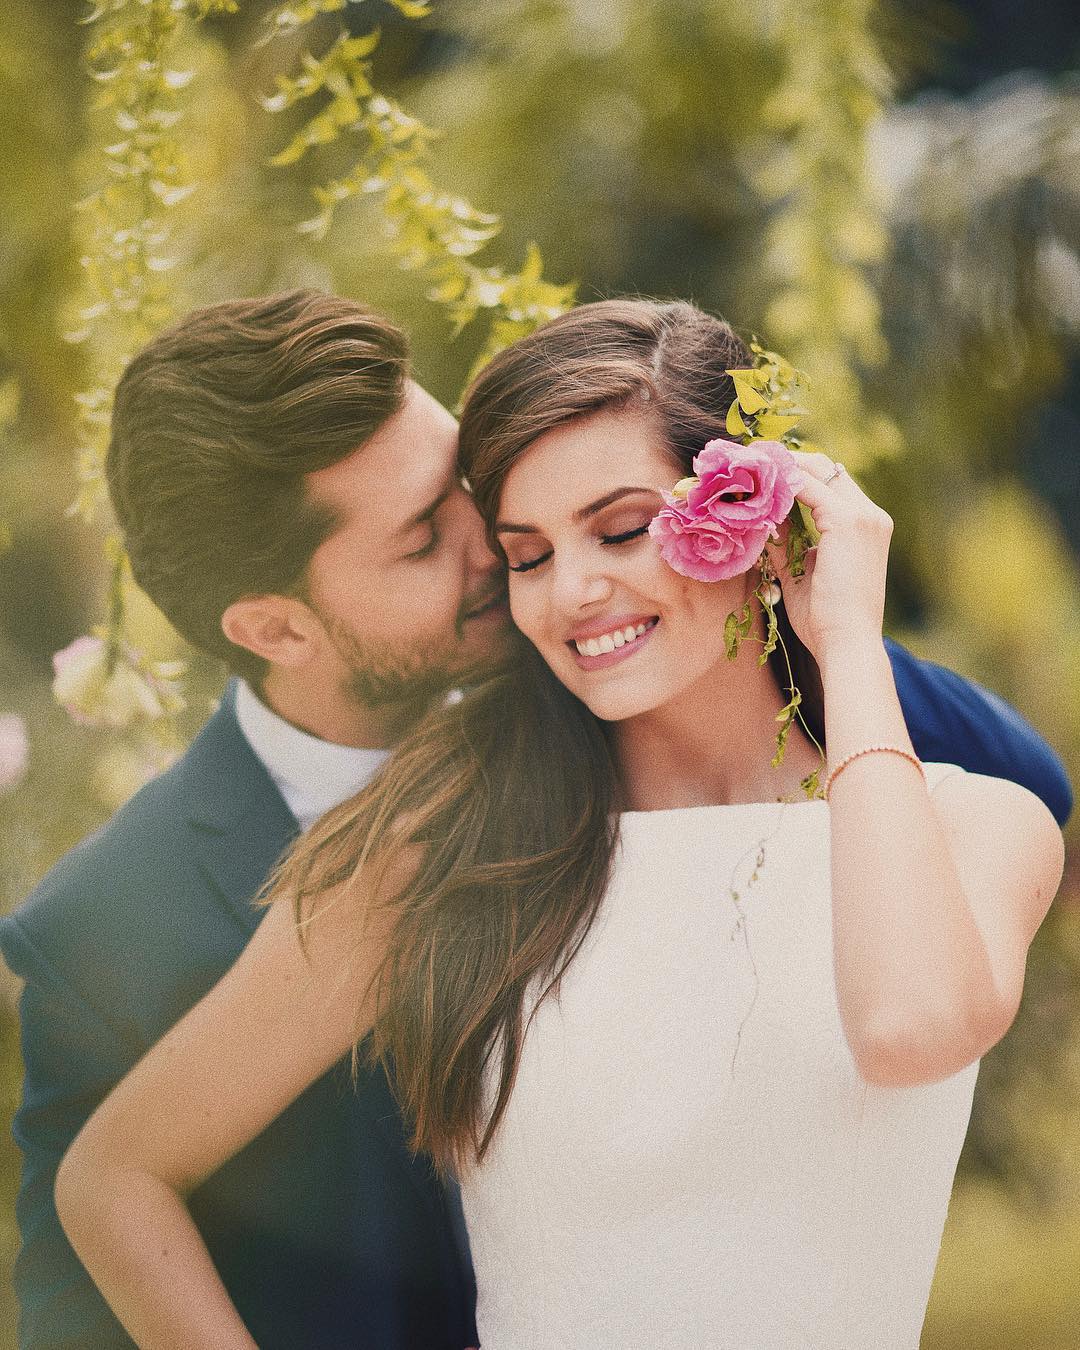 Romantic couple pose idea for a portrait. The groom is rocking an elegant navy blue suit and the bride a stunning mid length white dress with embroidered flowers. // ❤️This civil Wedding is absolutely delightful (Camila Queiroz and Kleber Toledo I Do's) // https://mysweetengagement.com/